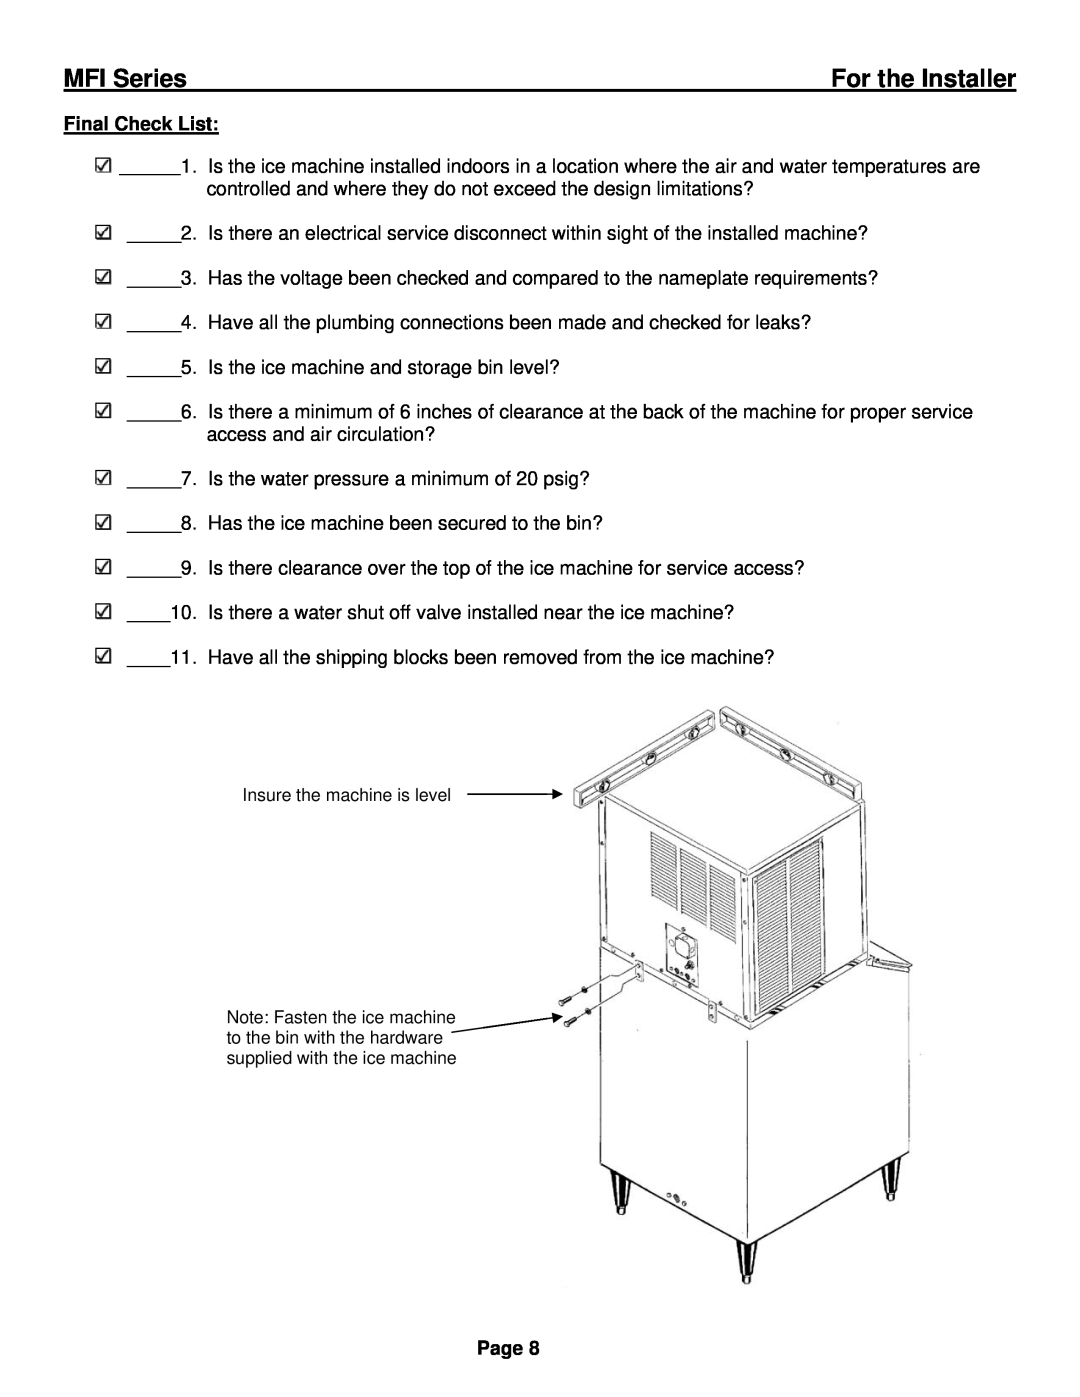 Ice-O-Matic installation manual Final Check List, MFI Series, For the Installer, Page 